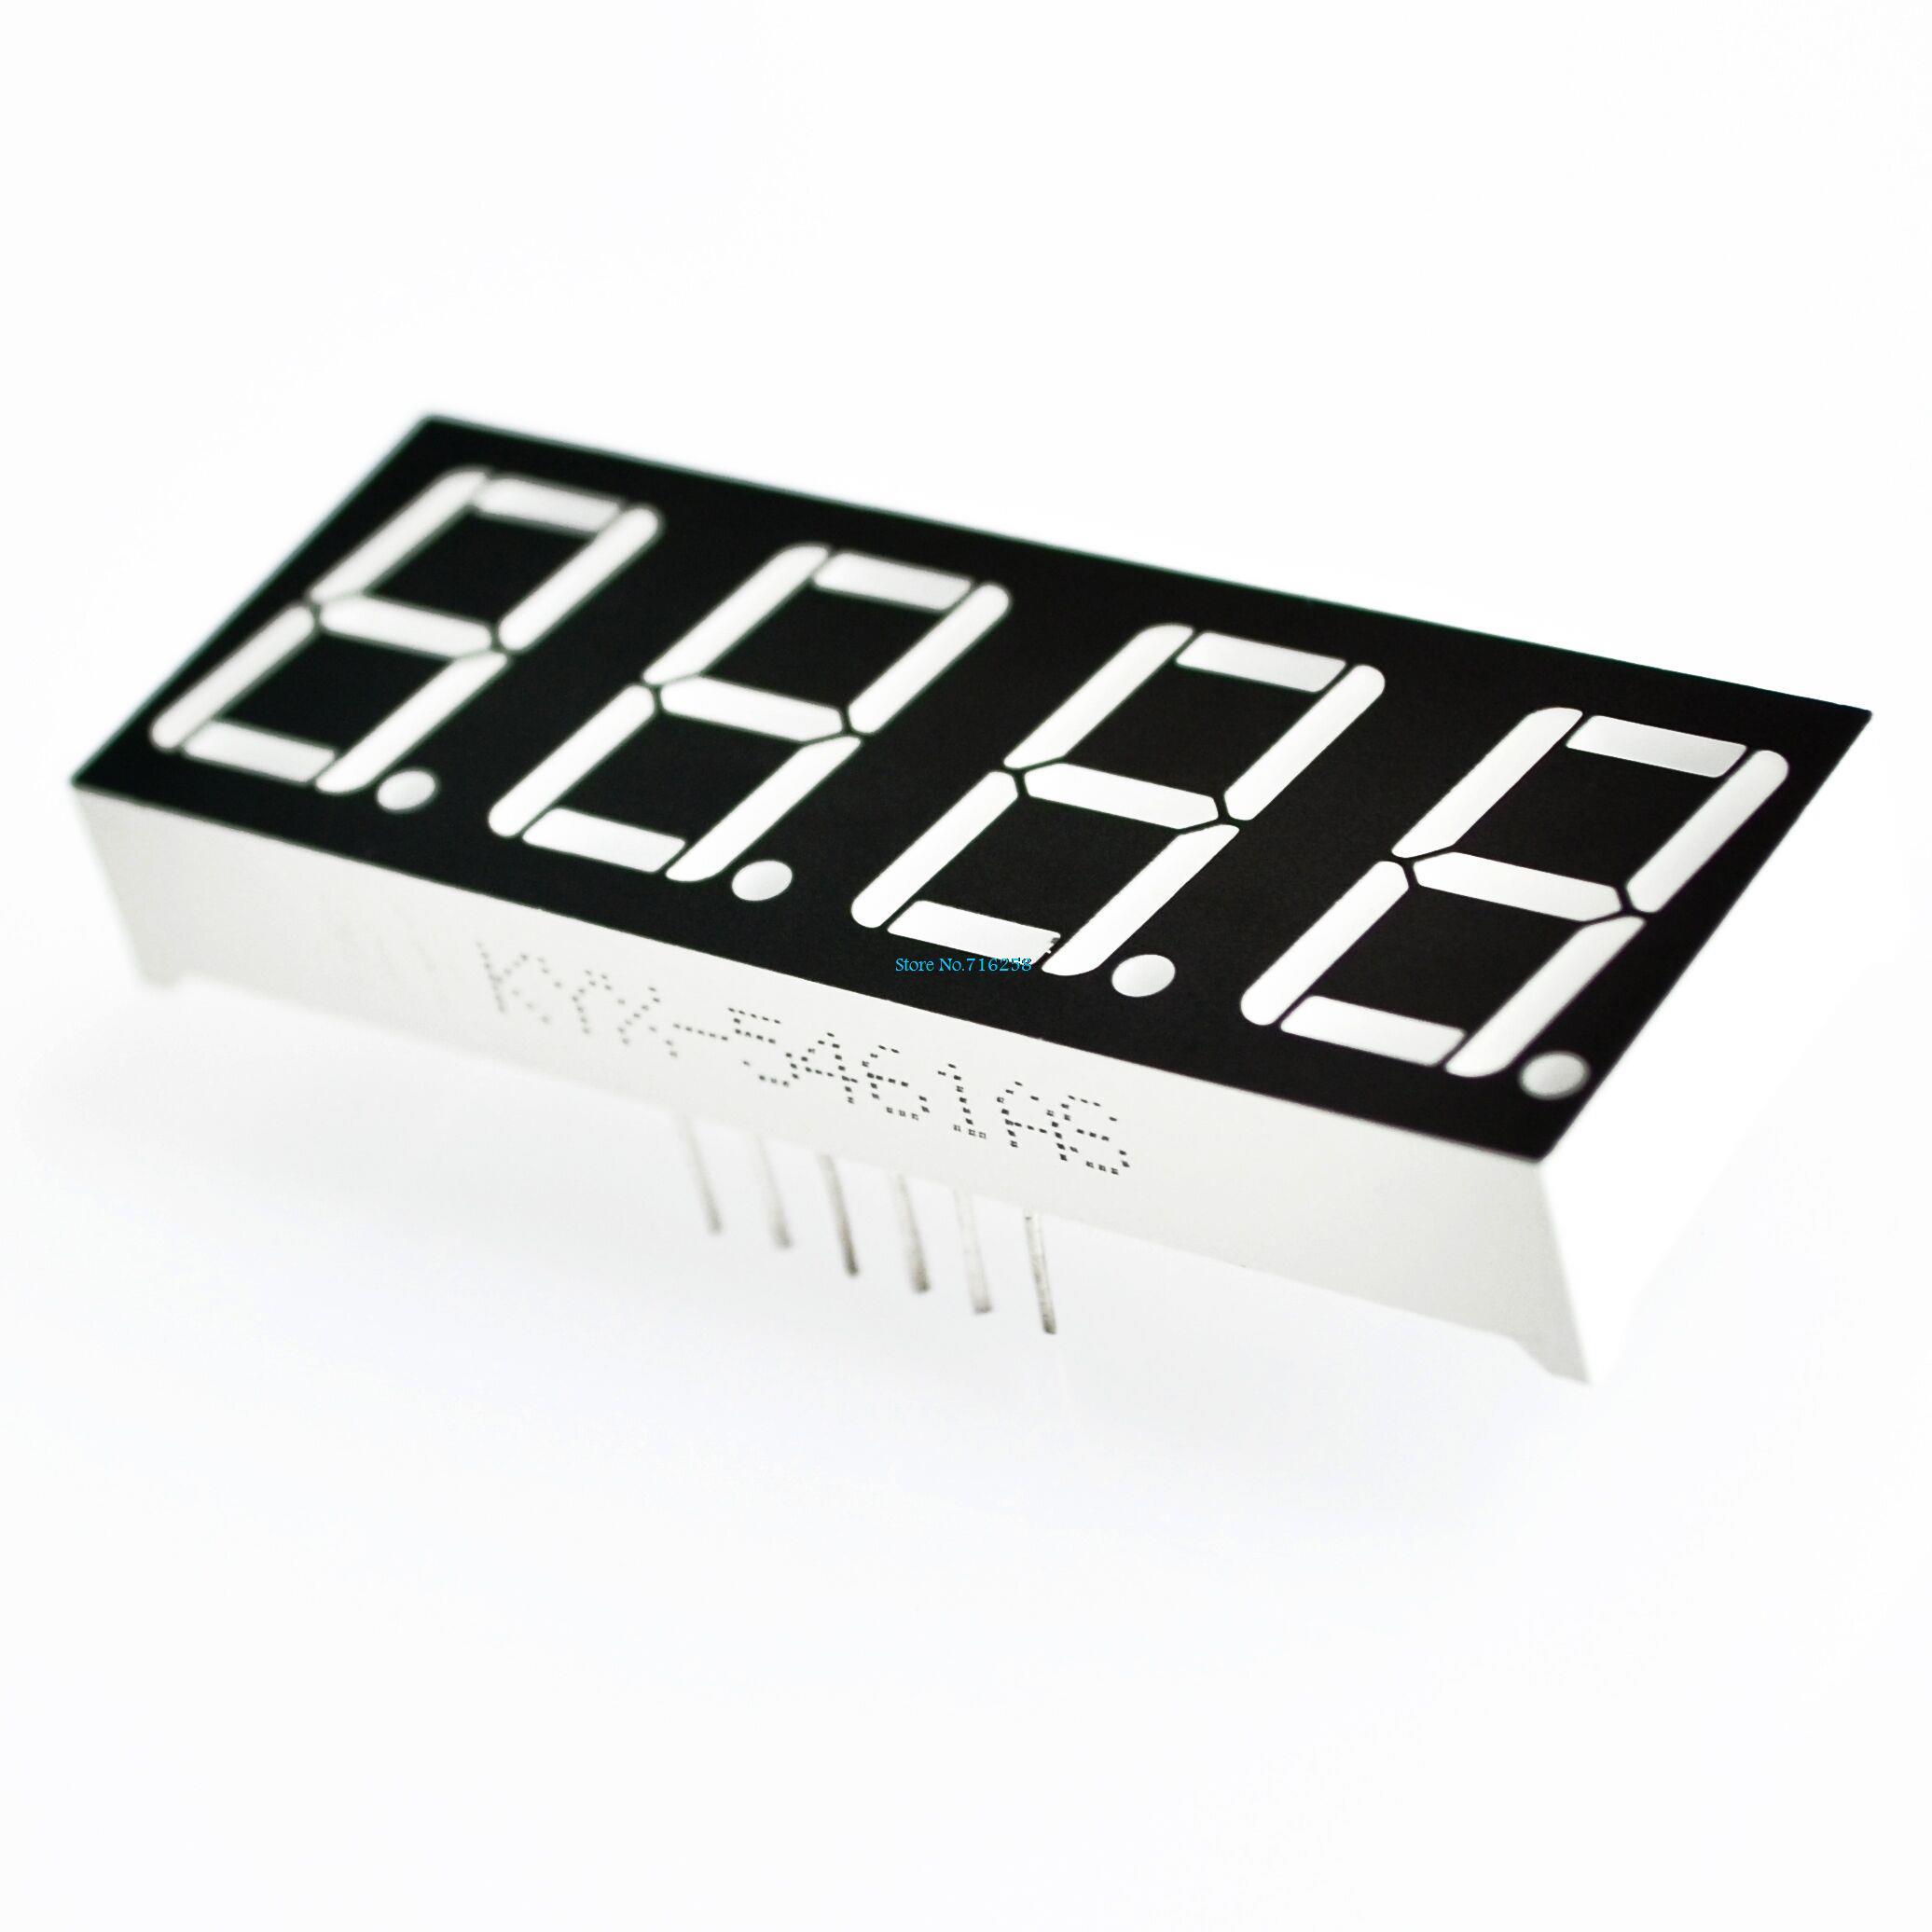 Best-Price-10pcs-lot-0-56-Inch-7-Seven-Segment-4-Digits-Red-Clock-LED-Display-Common-Anode-Time-12-Pins